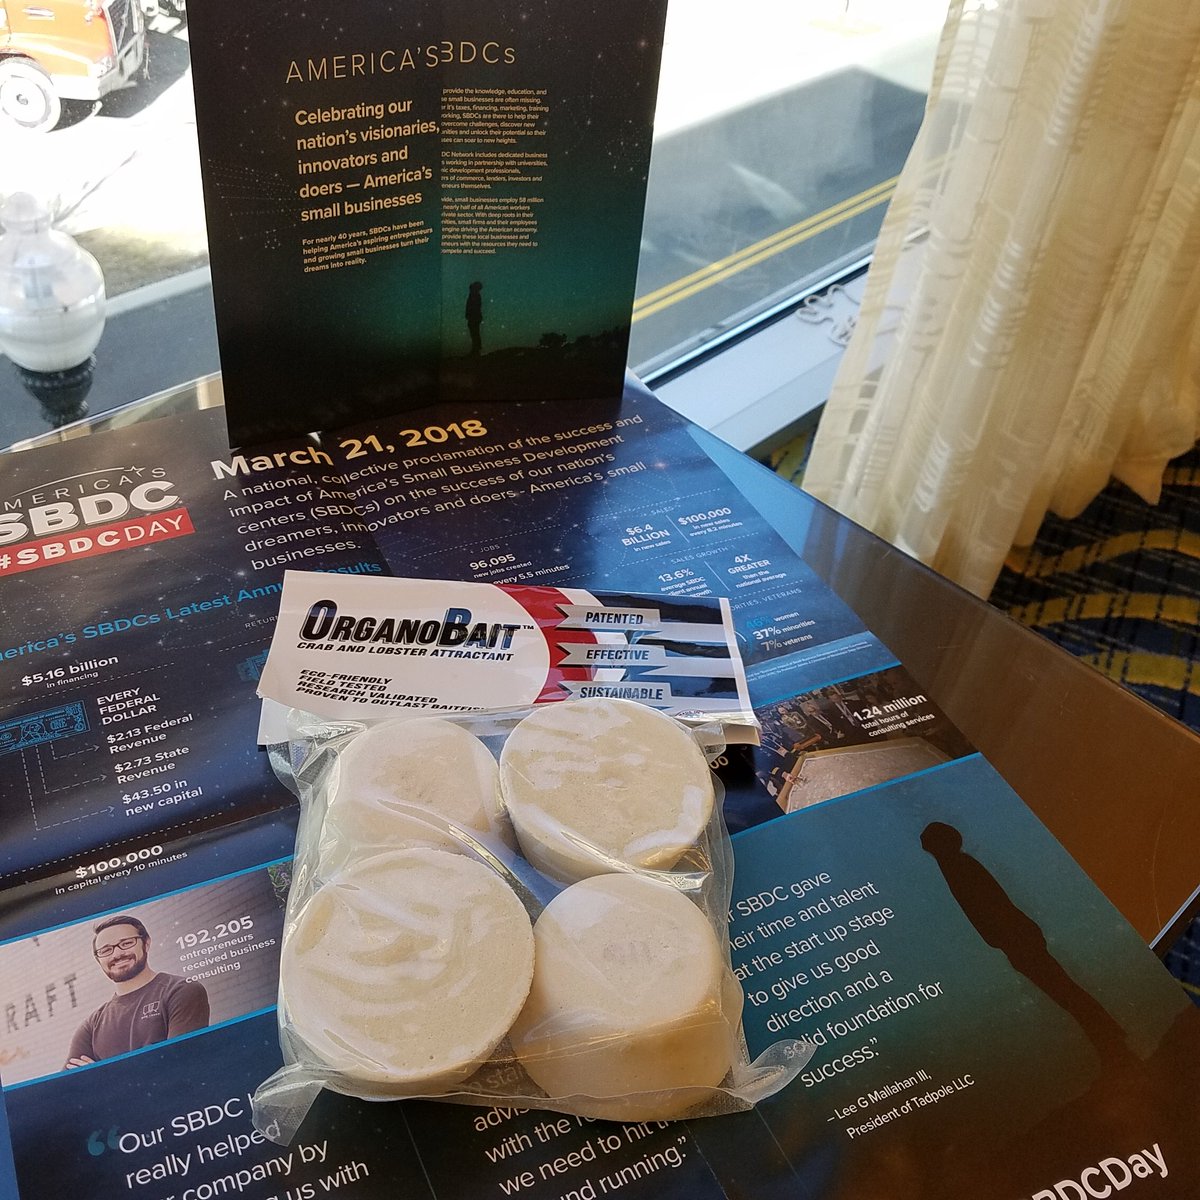 Excited and honored to showcase our ocean restorative technology on Capitol Hill #SBDC #SBDCday @NCSBTDC #clientsuccessmakesushappy
@ASBDC @NSFSBIR @NCSeaGrant